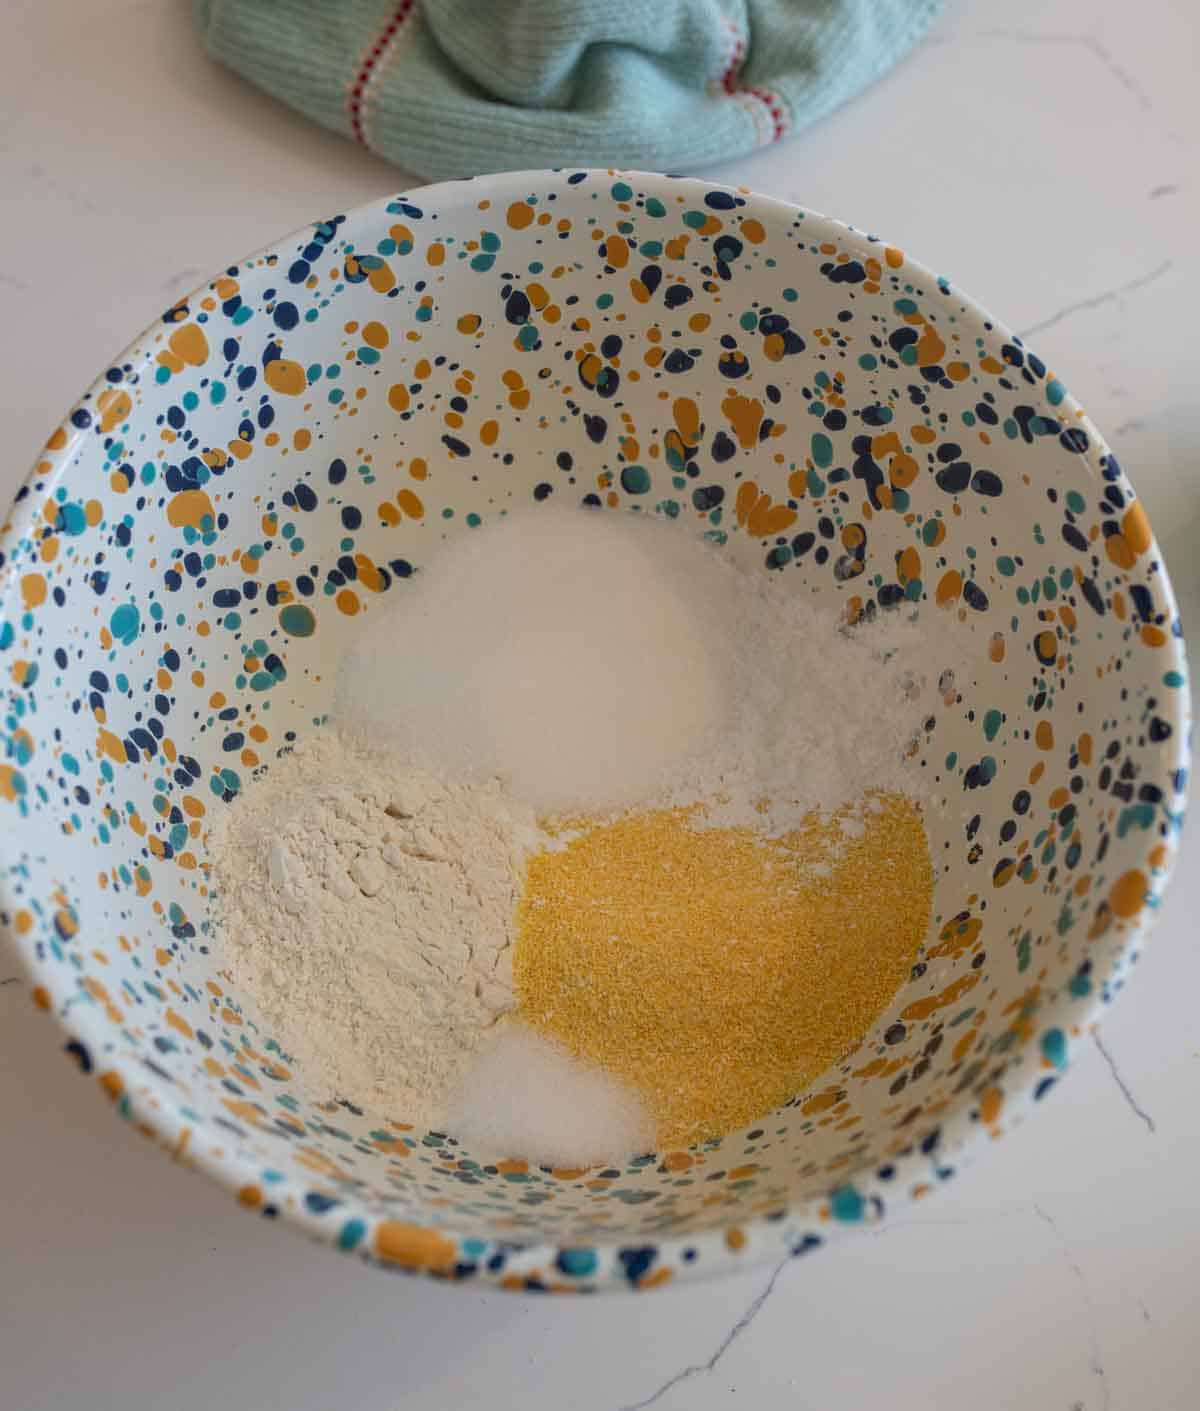 dry ingredients for cornbread in bowl.